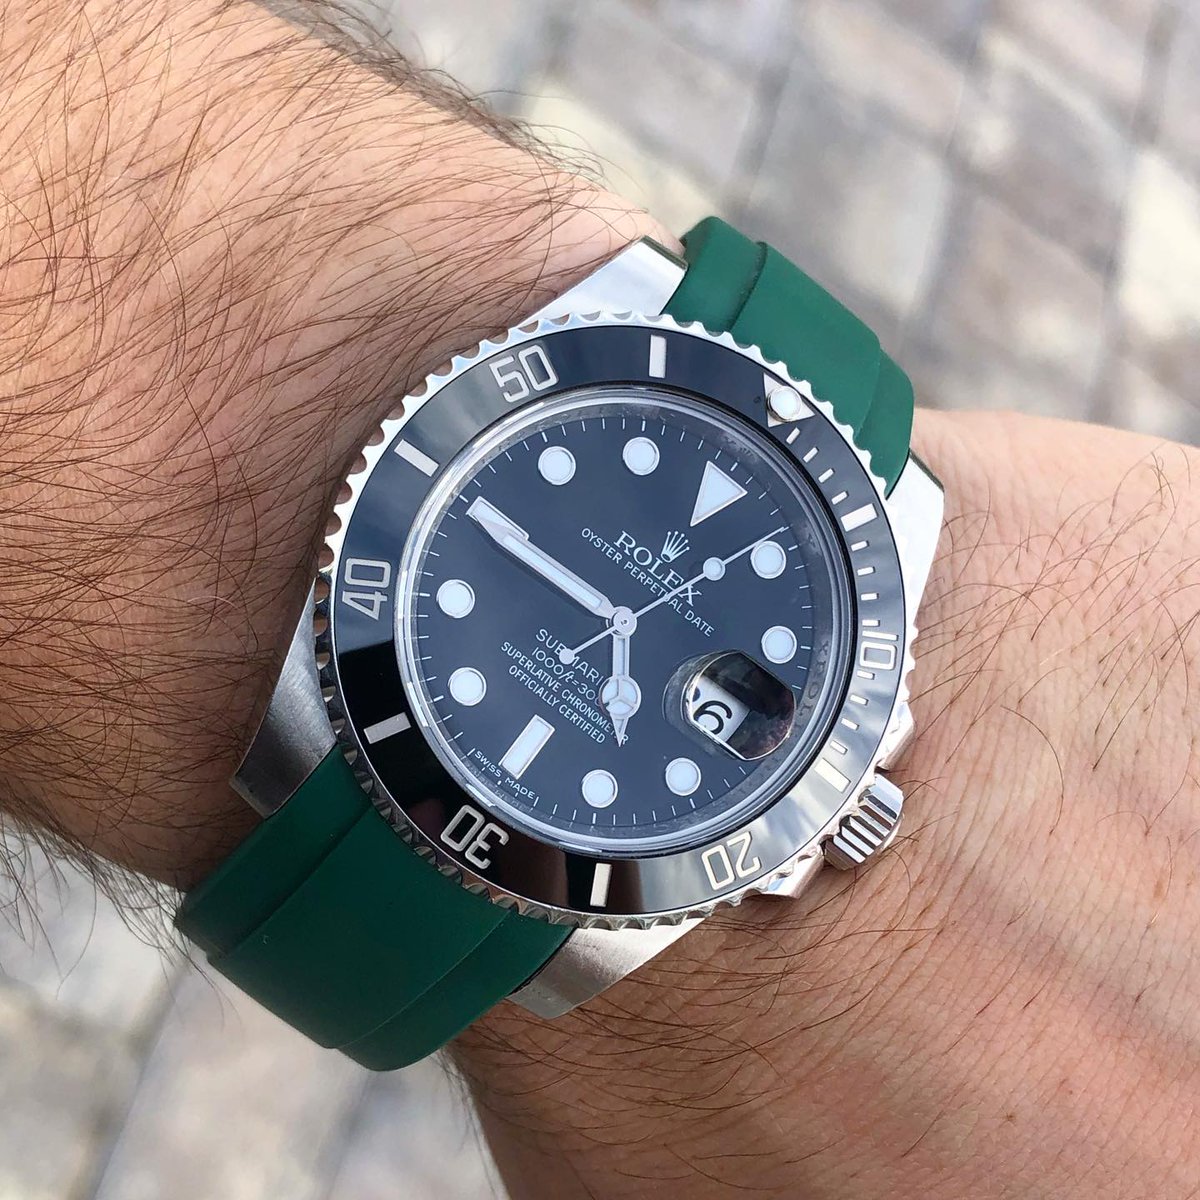 Subtropical El cuarto Camello Best rubber straps for the Rolex Submariner on the market